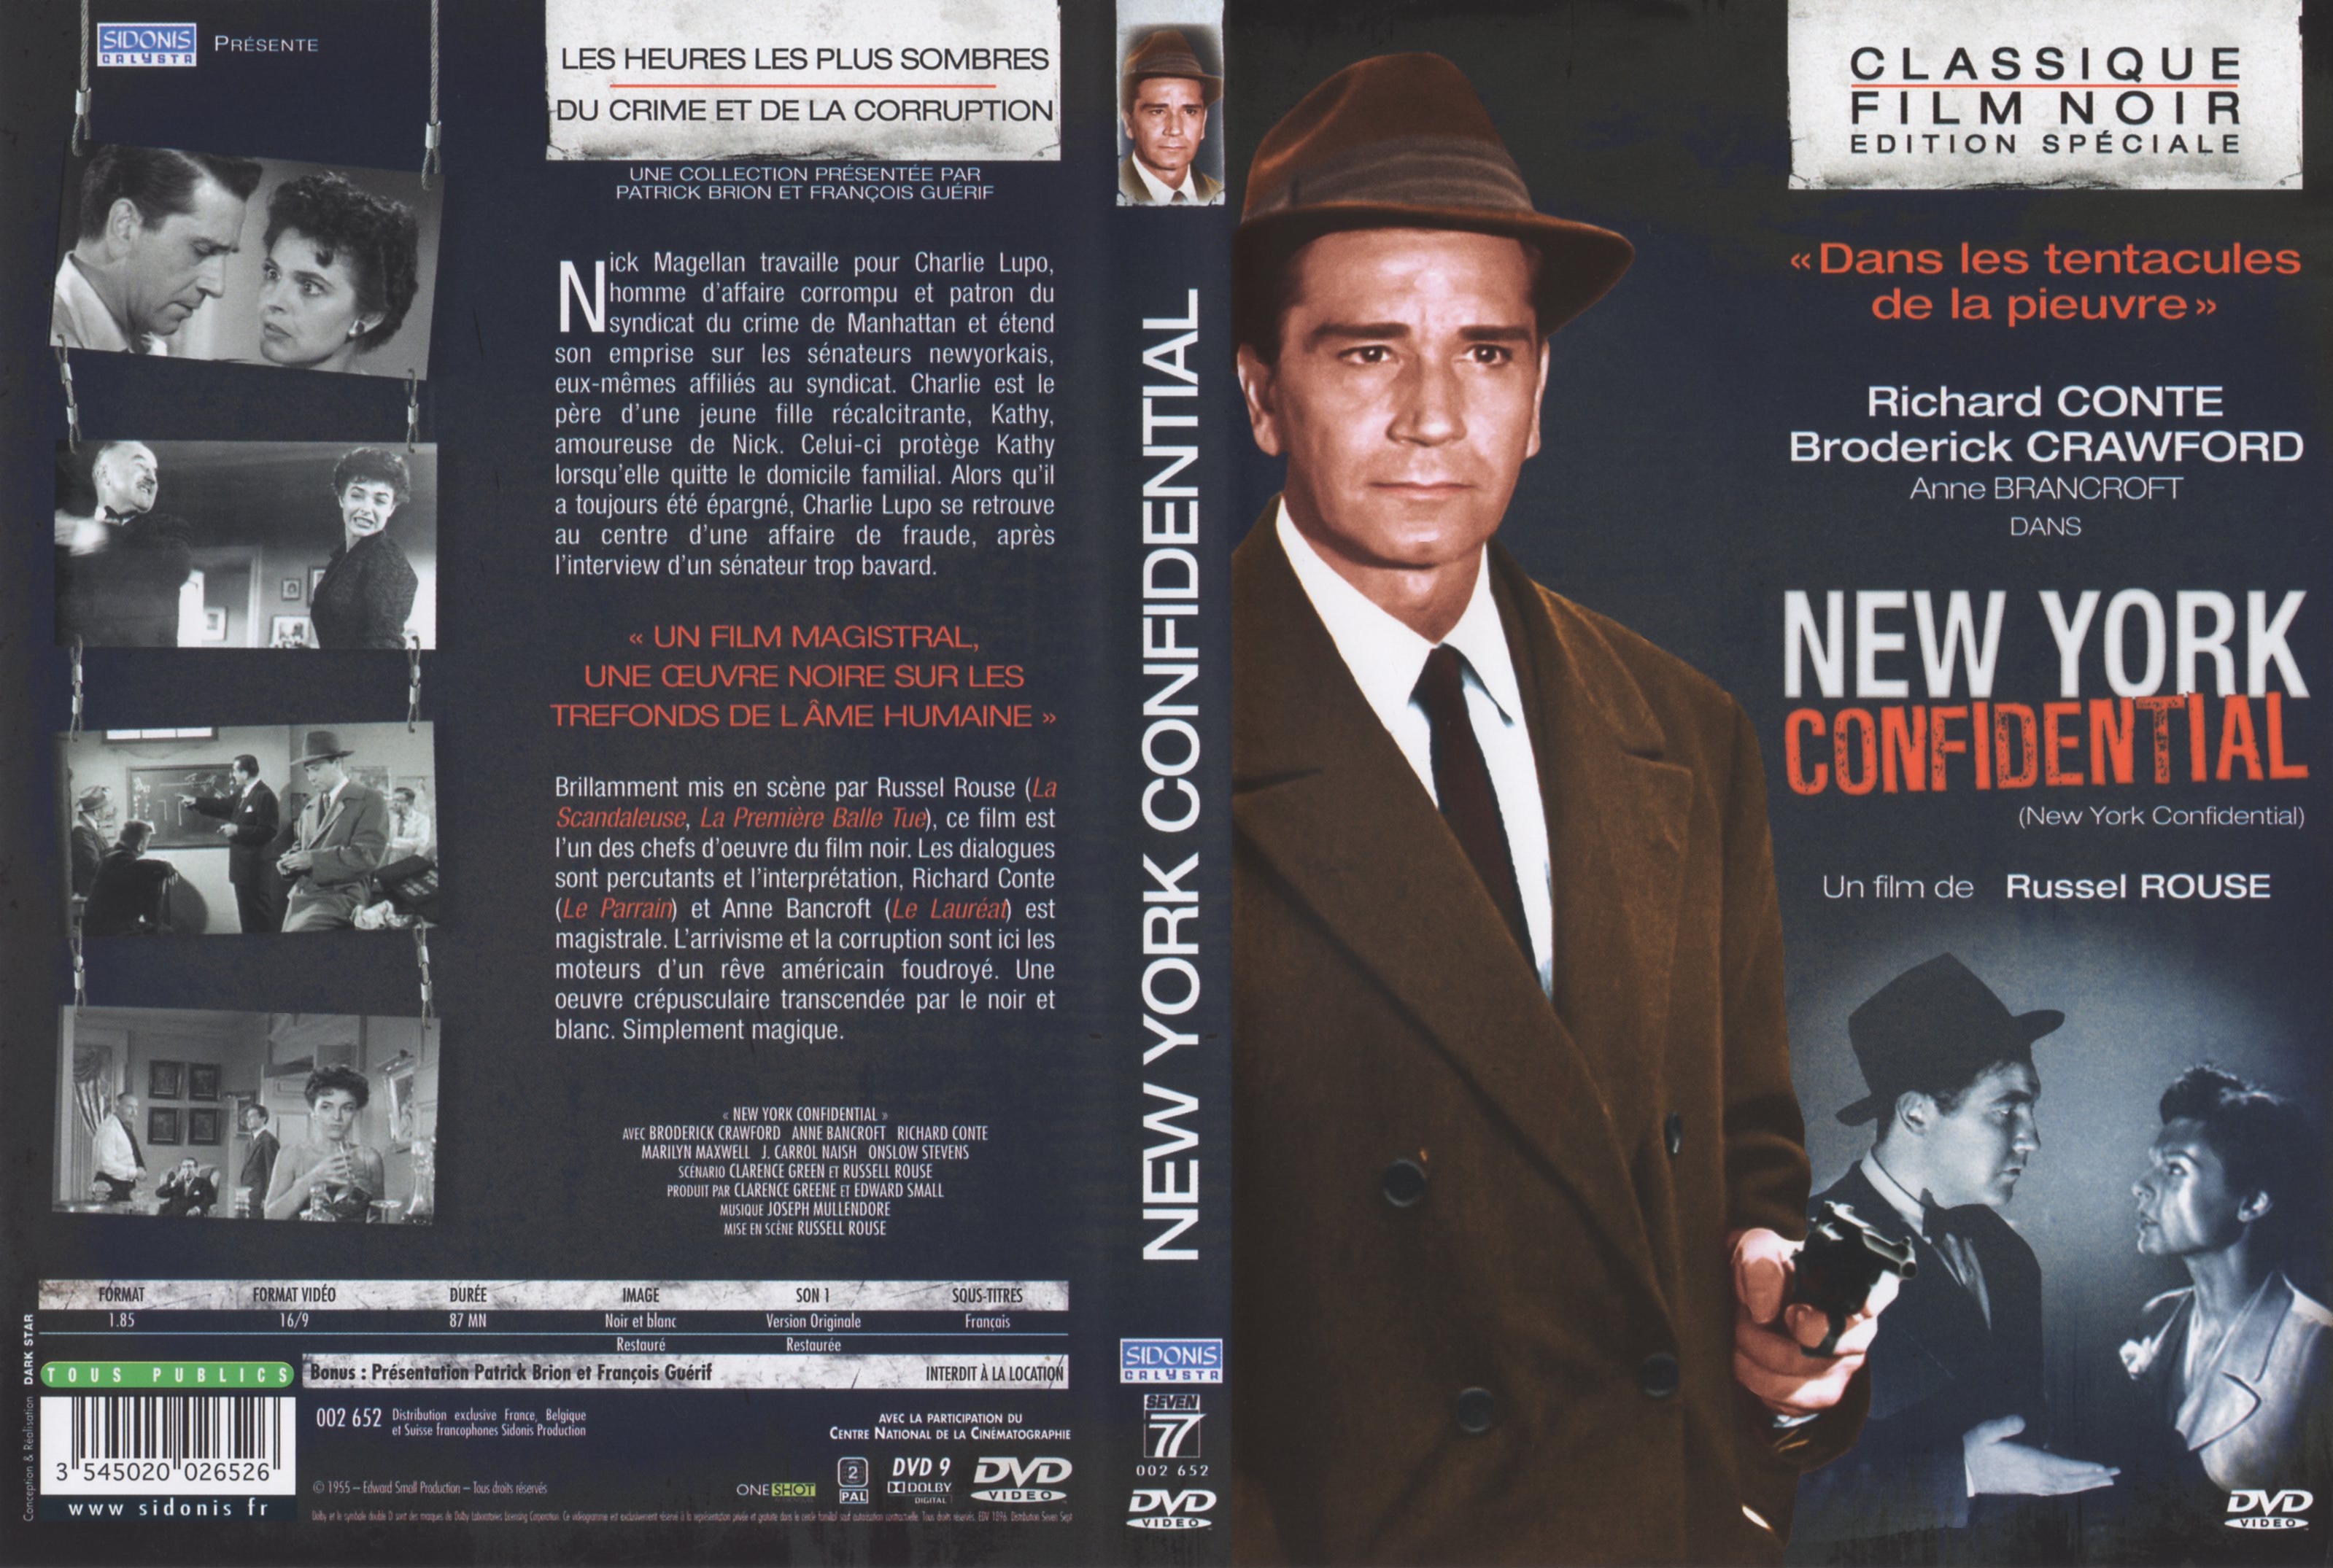 Jaquette DVD New york confidential